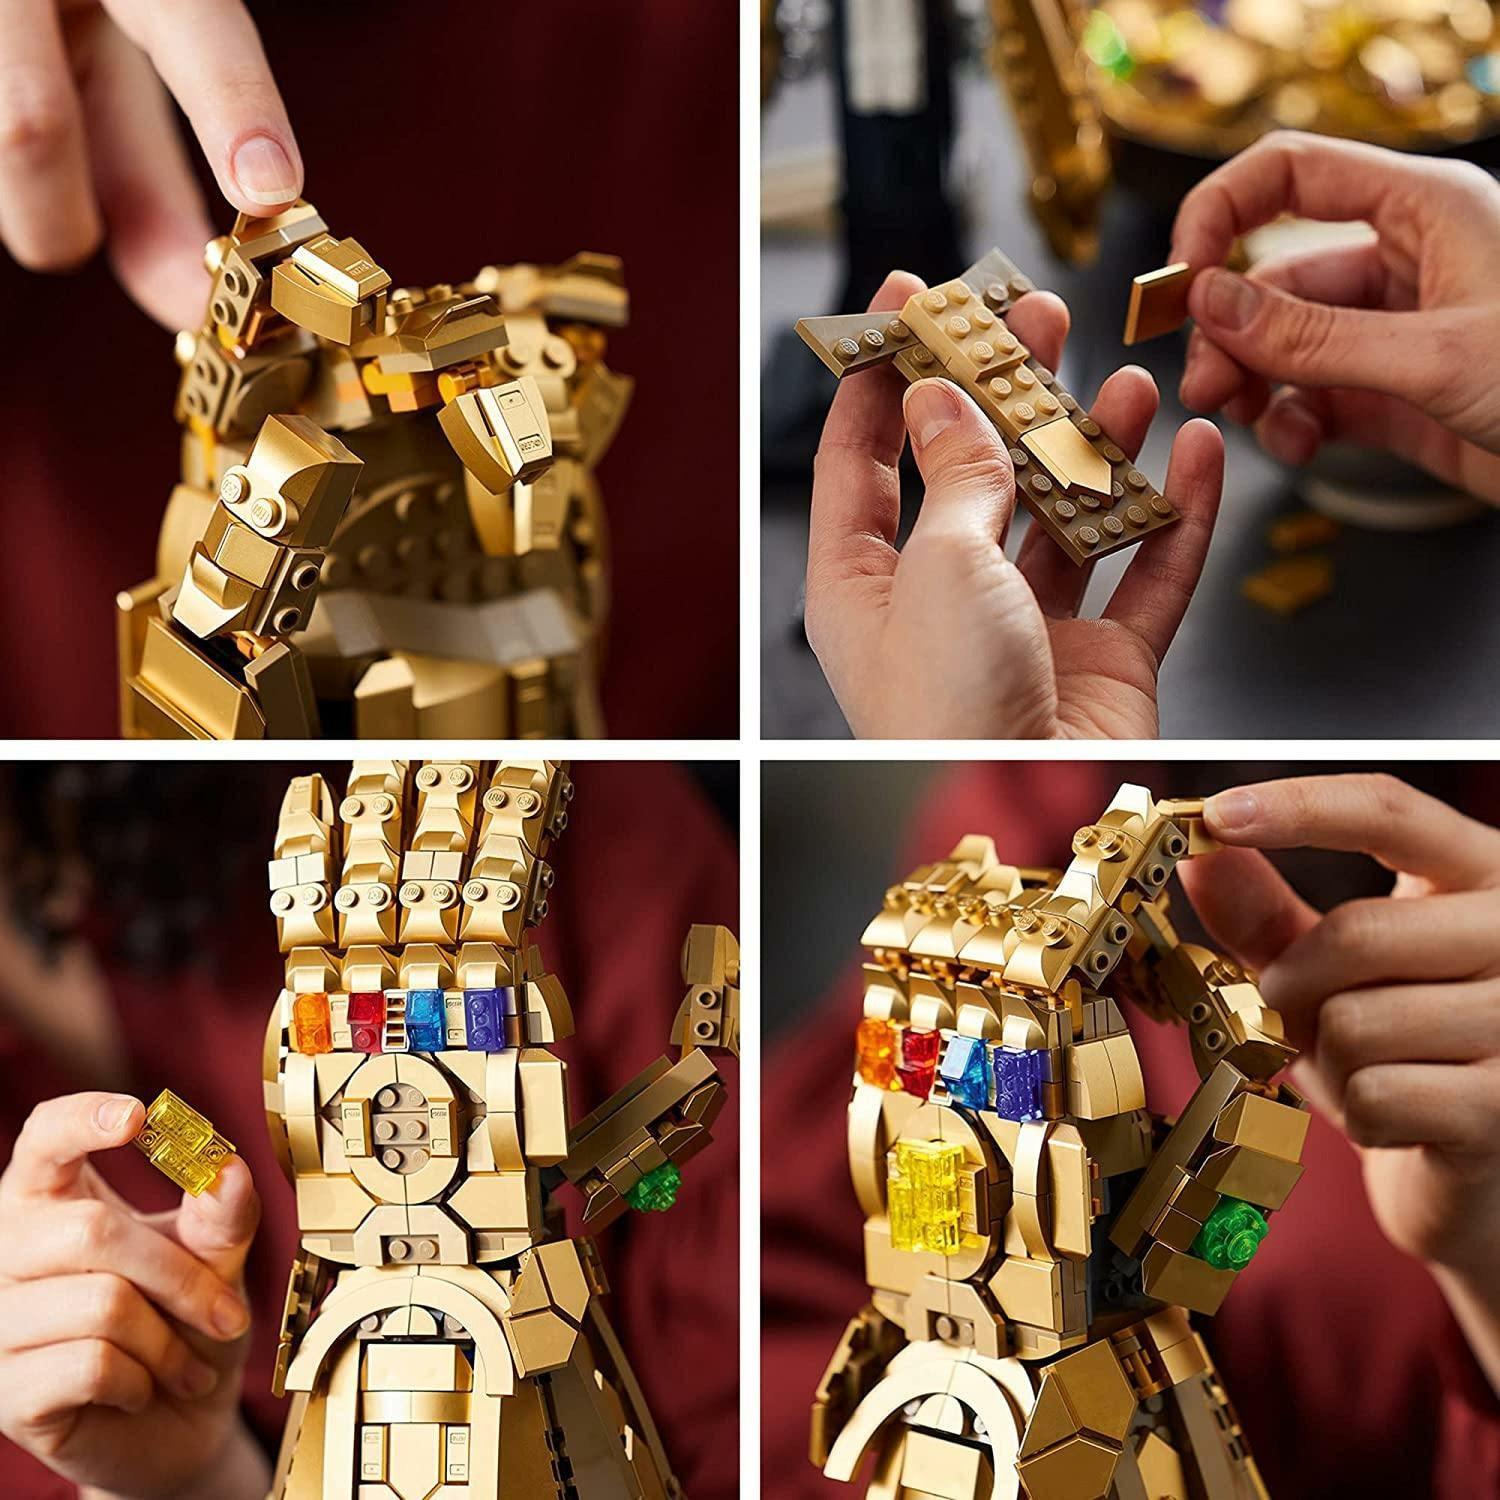 LEGO Marvel Thanos Infinity Gauntlet 76191 Thanos Right Hand Gauntlet with Infinity Stones (590 Pieces) - BumbleToys - 14 Years & Up, 18+, Boys, LEGO, Marvel, OXE, Pre-Order, Thanos